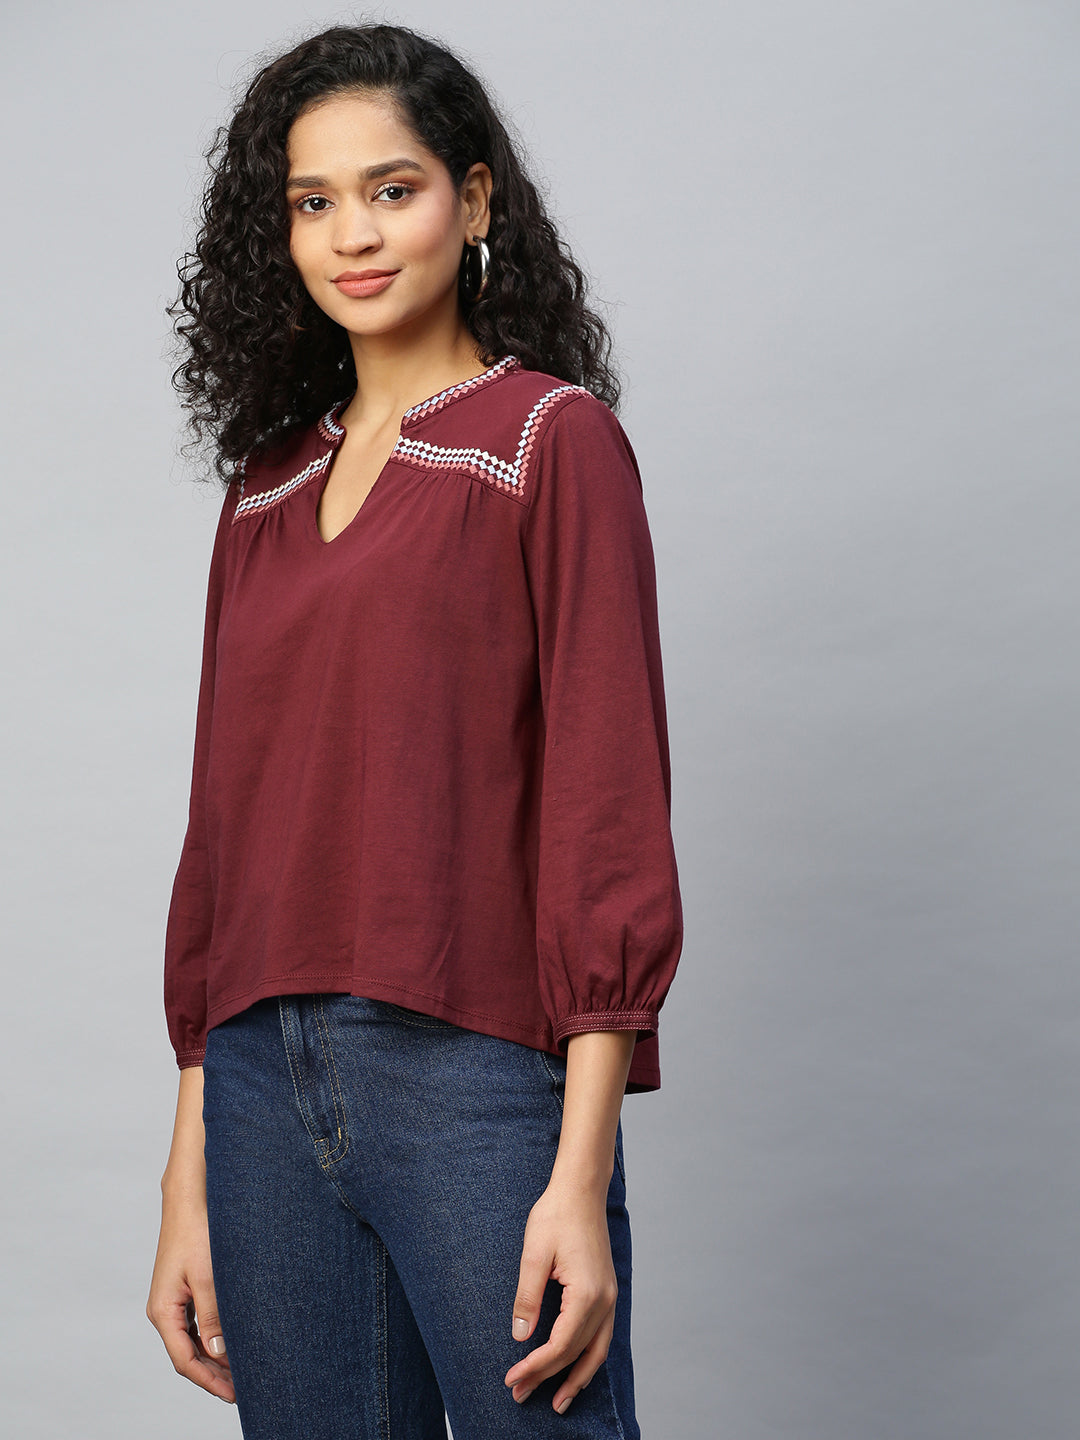 Cotton Jesrey Embroidered Tunic Top